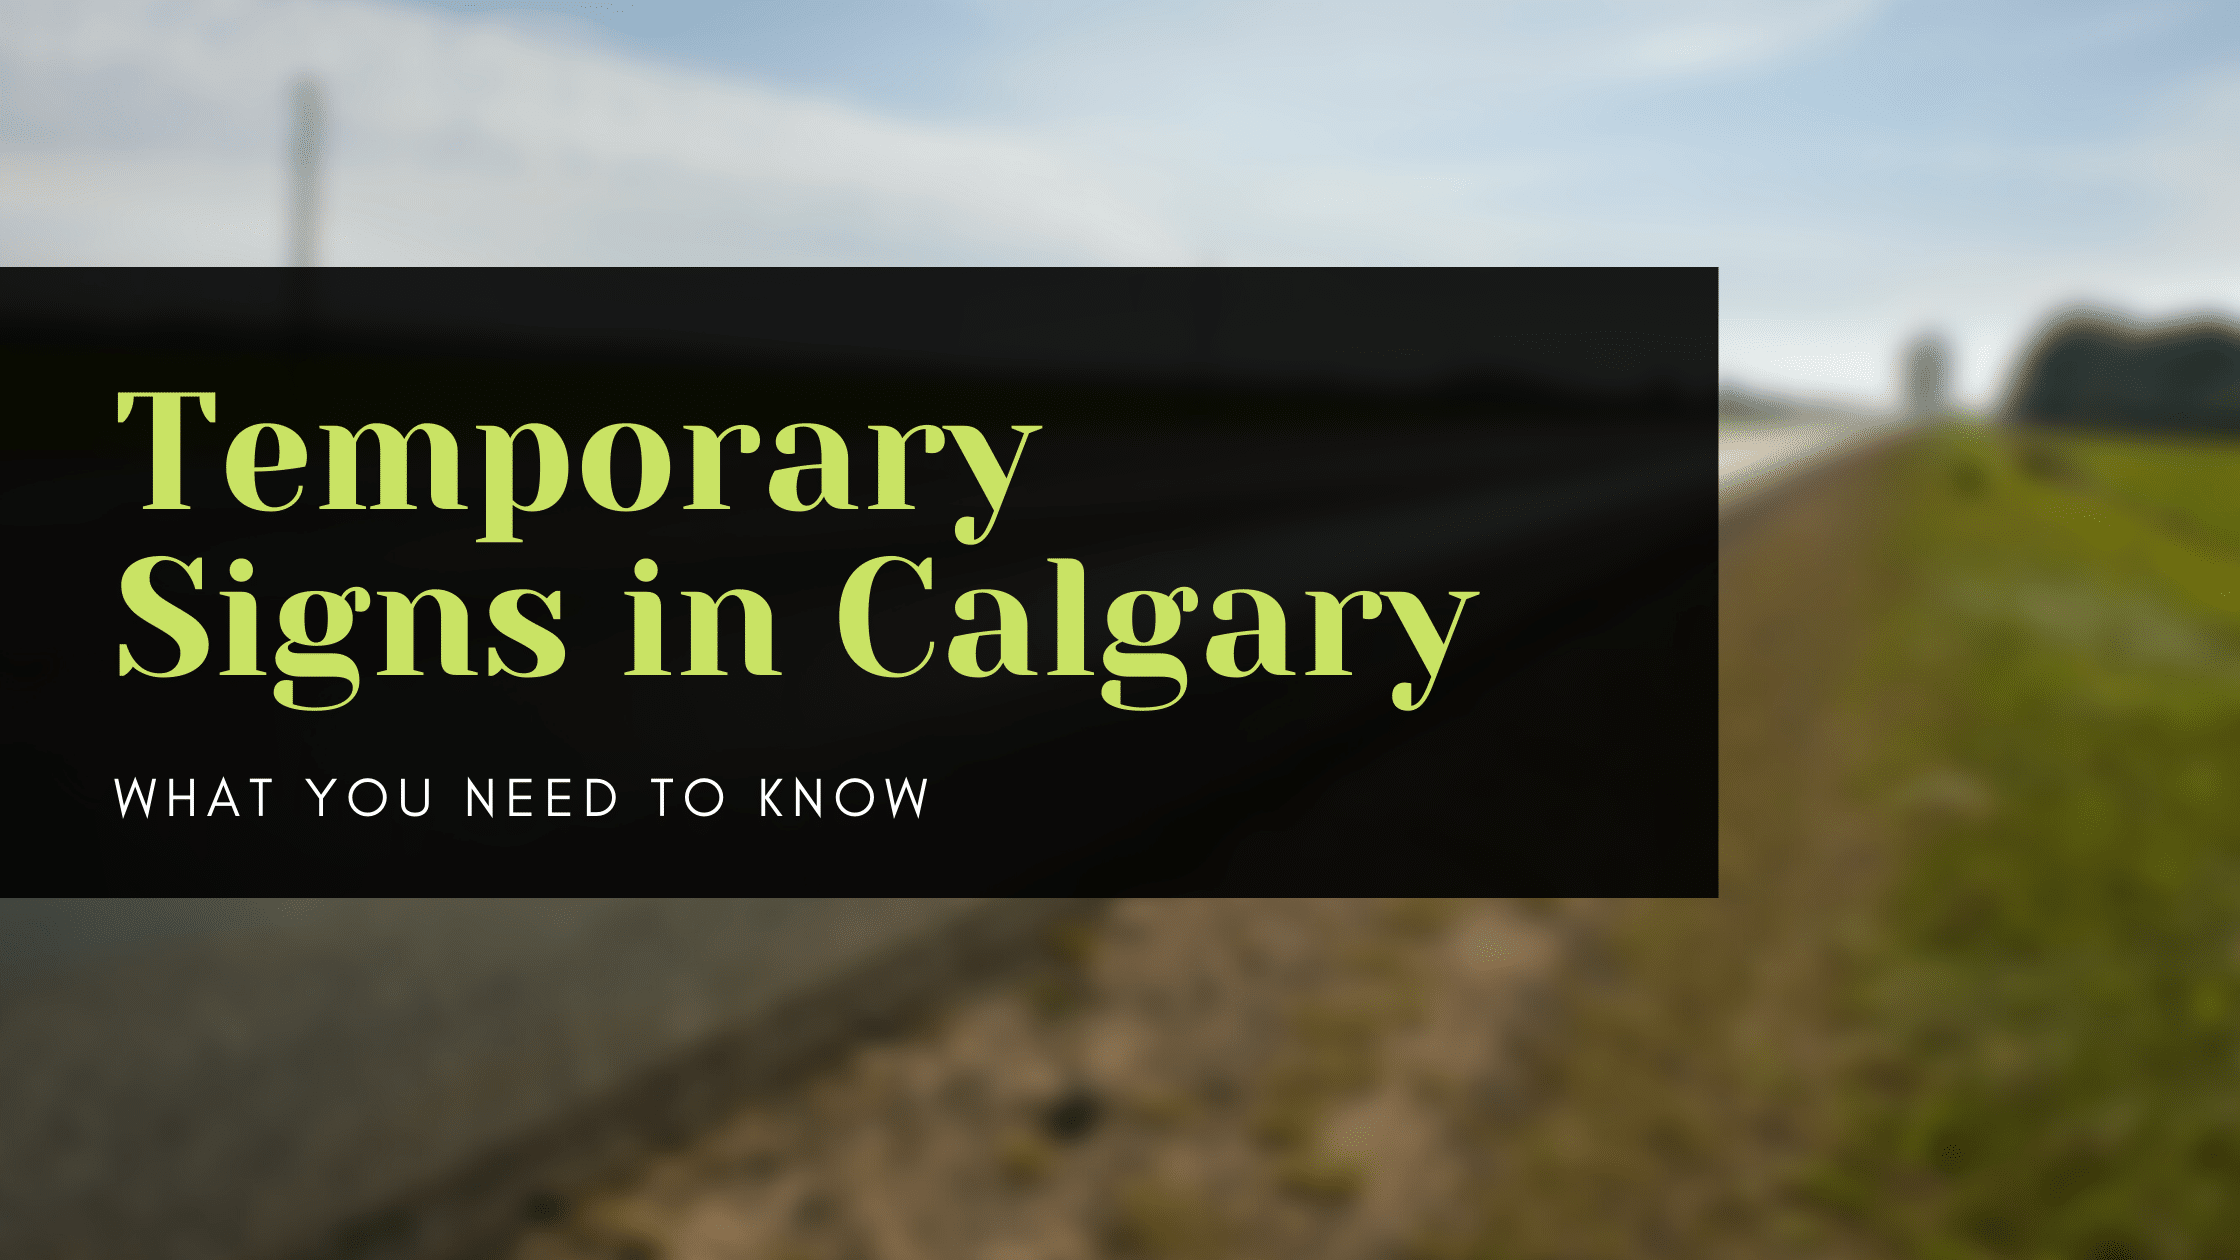 Temporary signs in Calgary: What you need to know in green letters, in a black box left-aligned over a blurred photo of a grassy roadside and a blue sky.